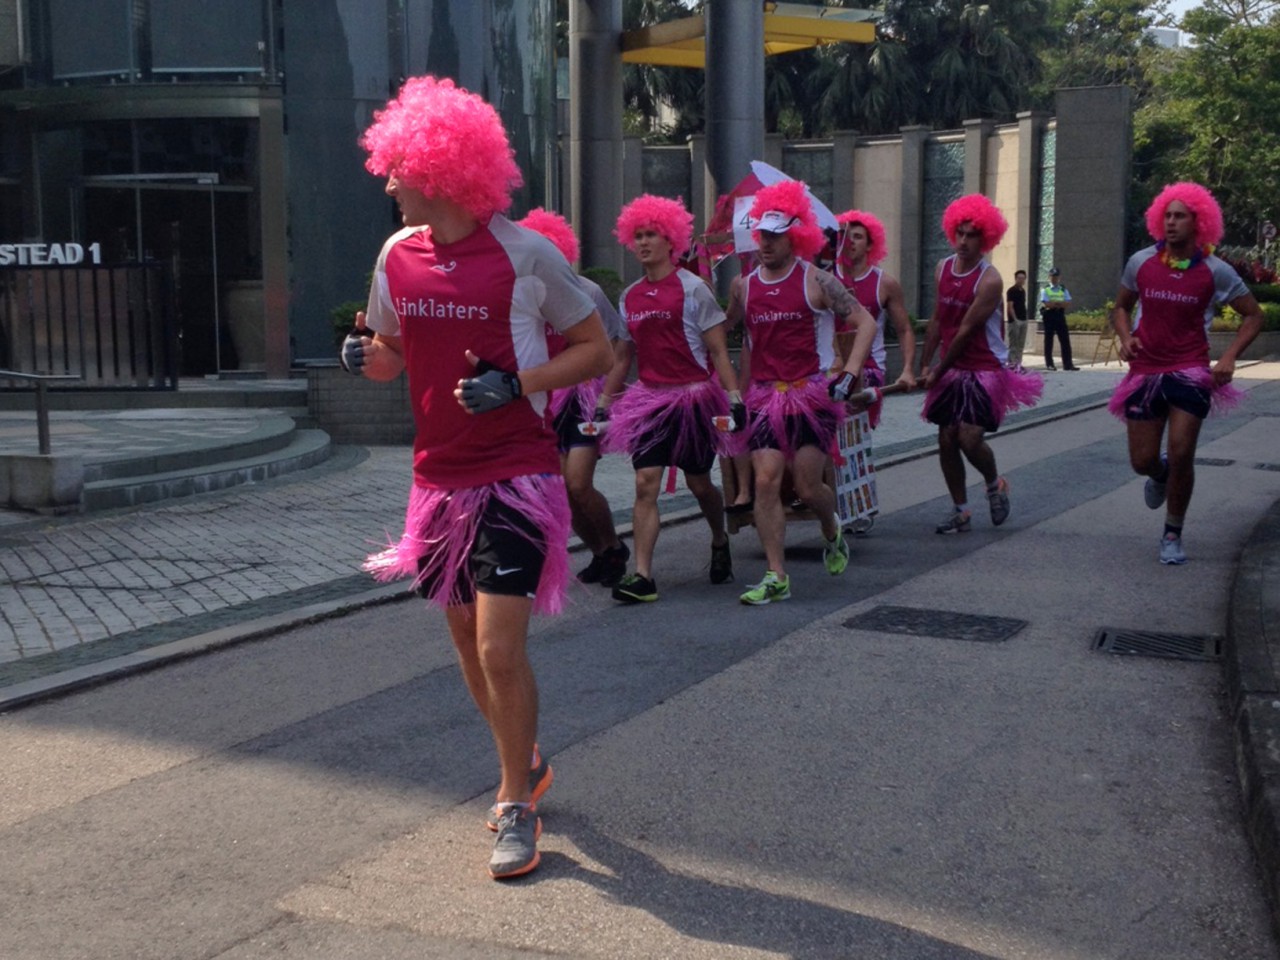 The festively dressed racers remind some of San Francisco's Bay to Breakers race. (Charlie Schroeder/Only A Game)